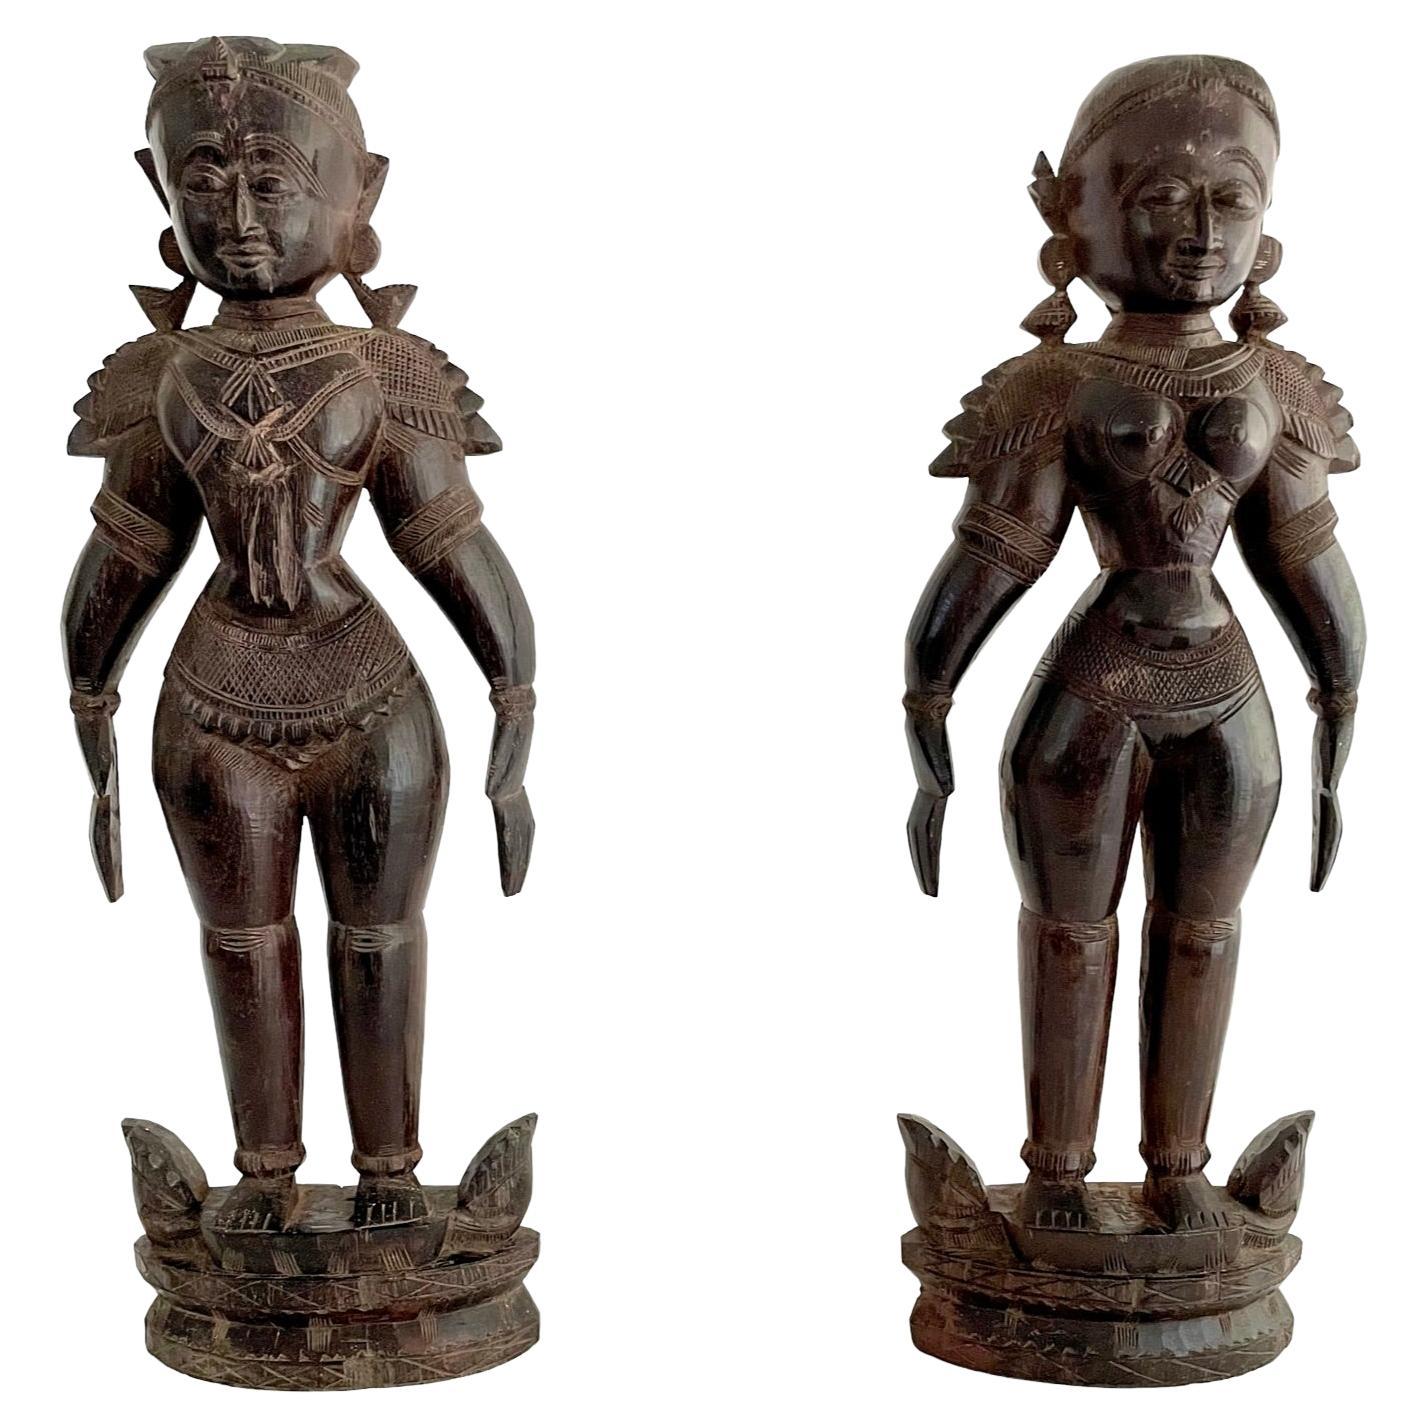 Pair of Early 20th Century Carved Marapcchi Bommais Dolls from Southern India